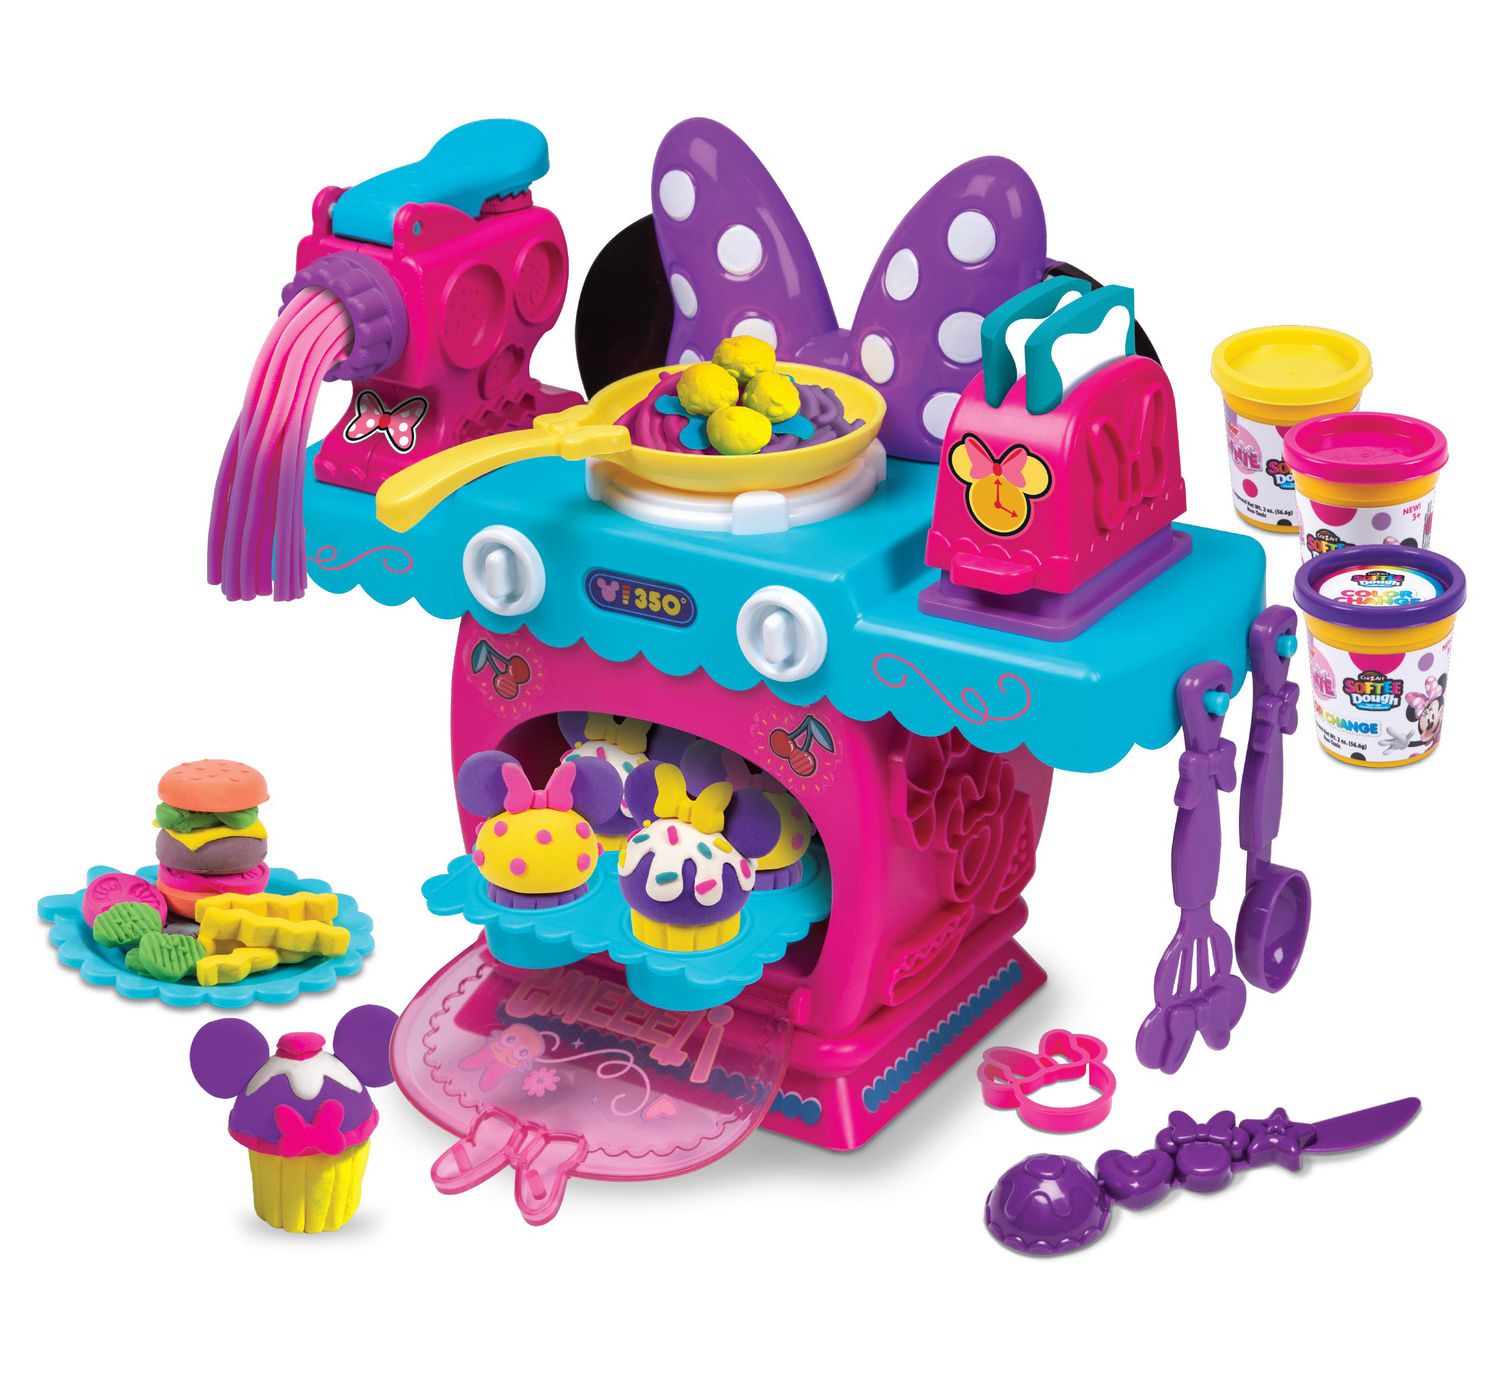 Cra-Z-Art Softee Dough 10-in-1 Minnie Mouse Color Change Kitchen 